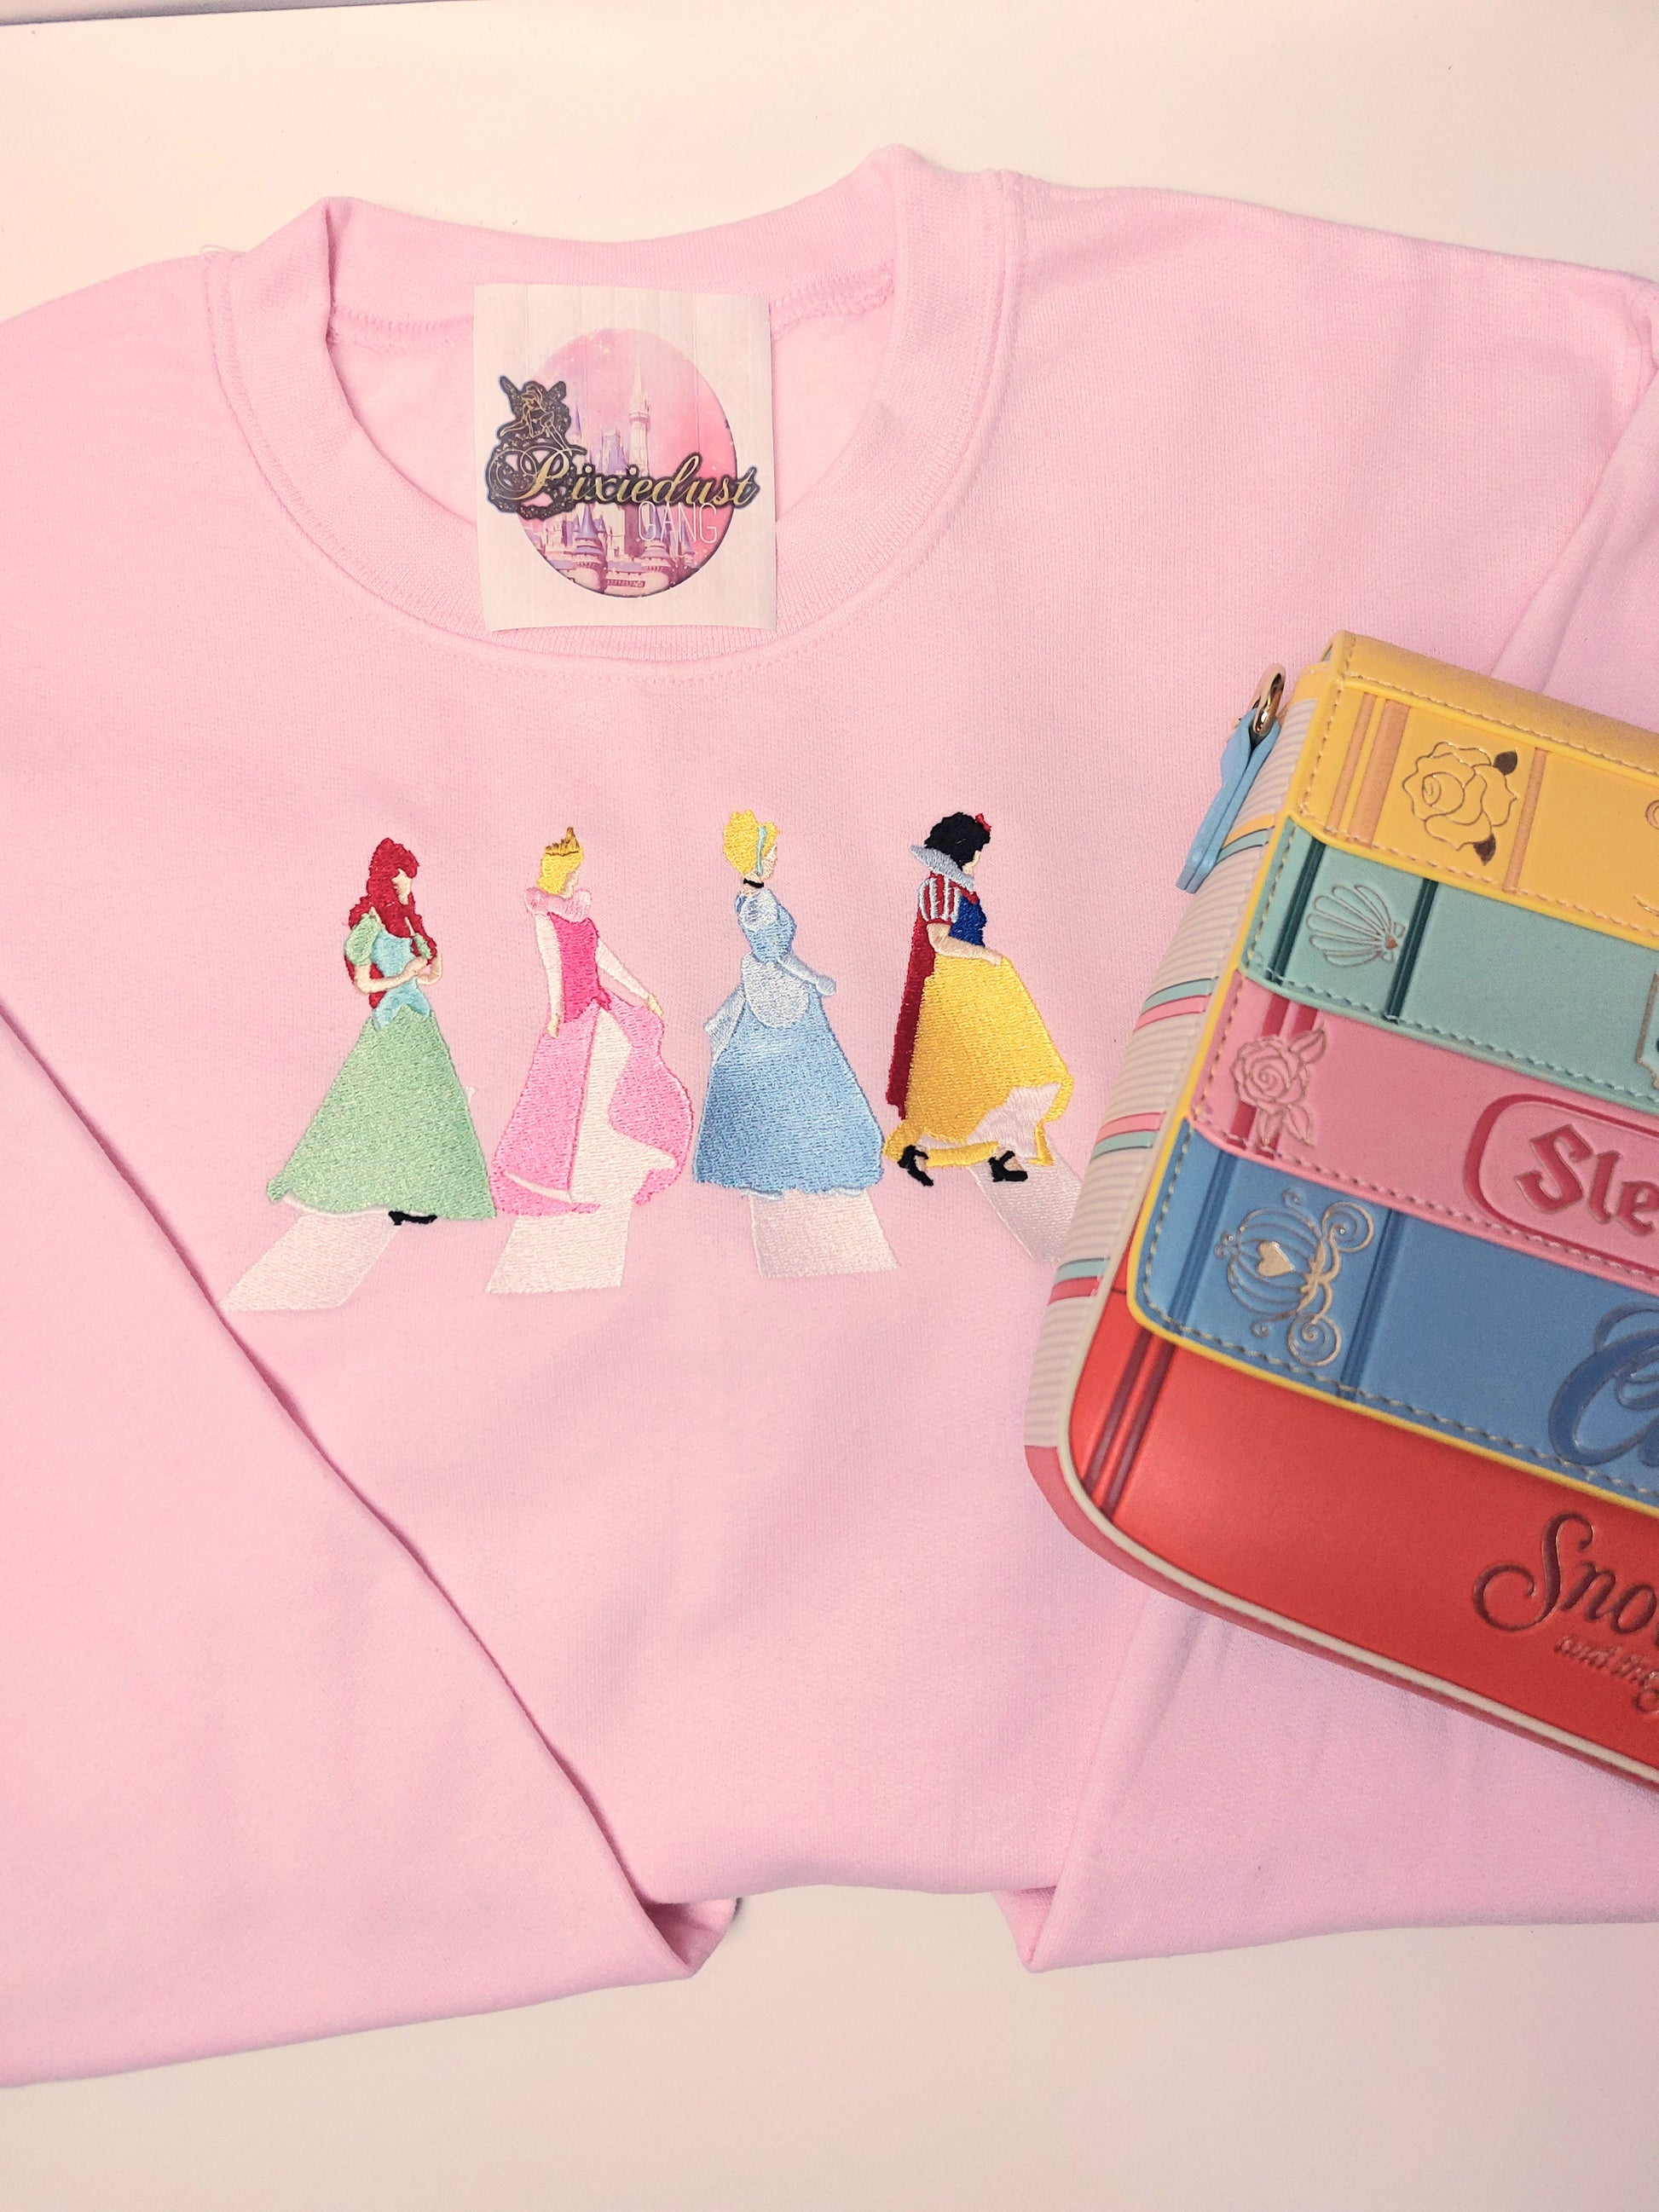 Princess Abbery embroidered sweatshirt by pixiedust gang